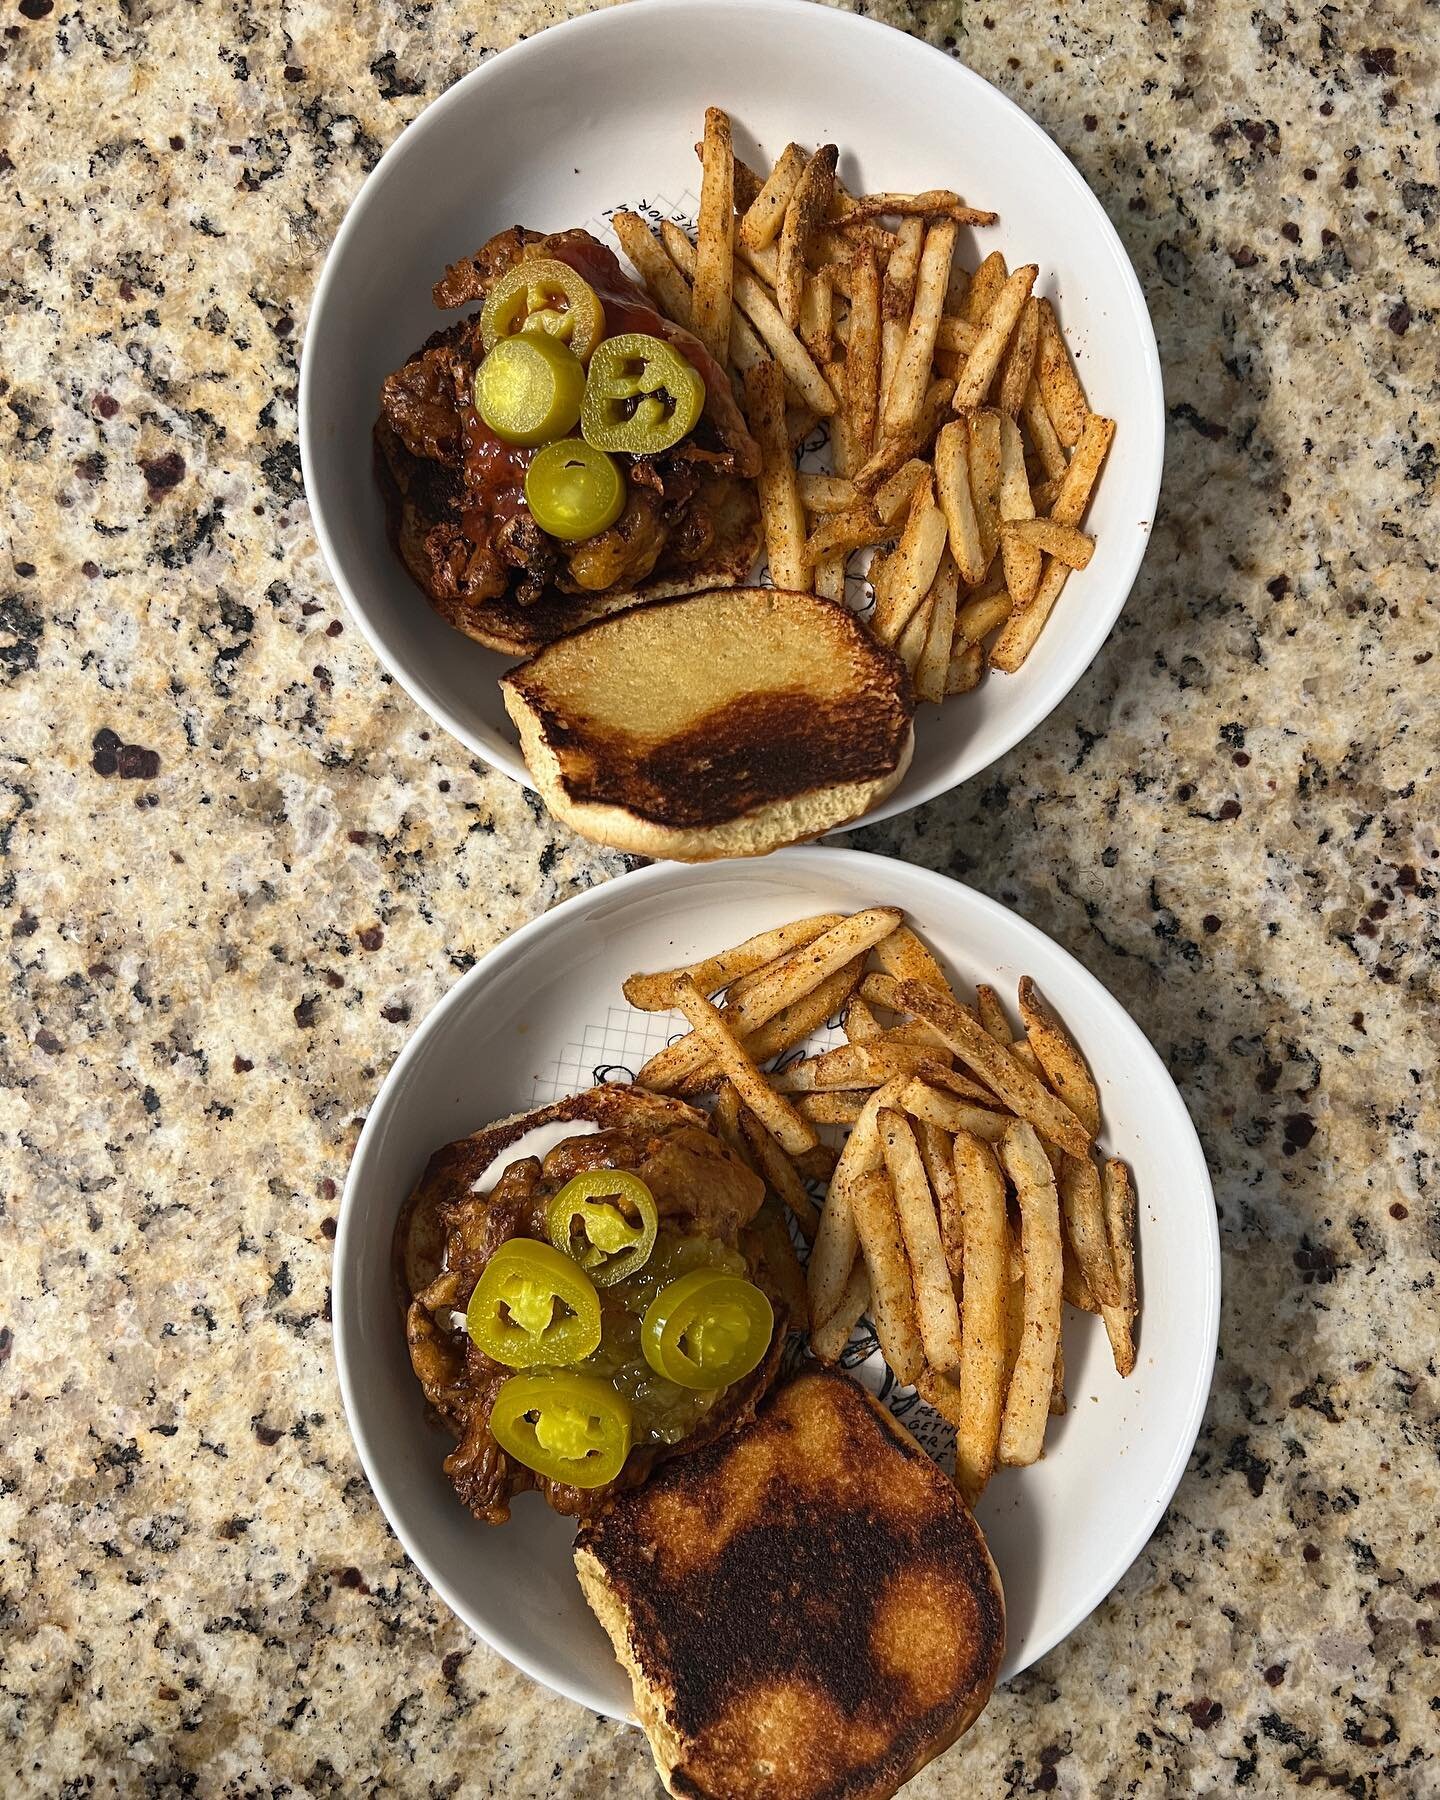 Hot agave oyster mushroom sandwich with seasoned fries

Joes way- Fried oyster mushroom with blue cheez, wicked relish, jalape&ntilde;os on a toasted bun!

@absolutelyaisha &lsquo;s way- Friend Oyster mushroom with habanero ketchup, hot agave and jal